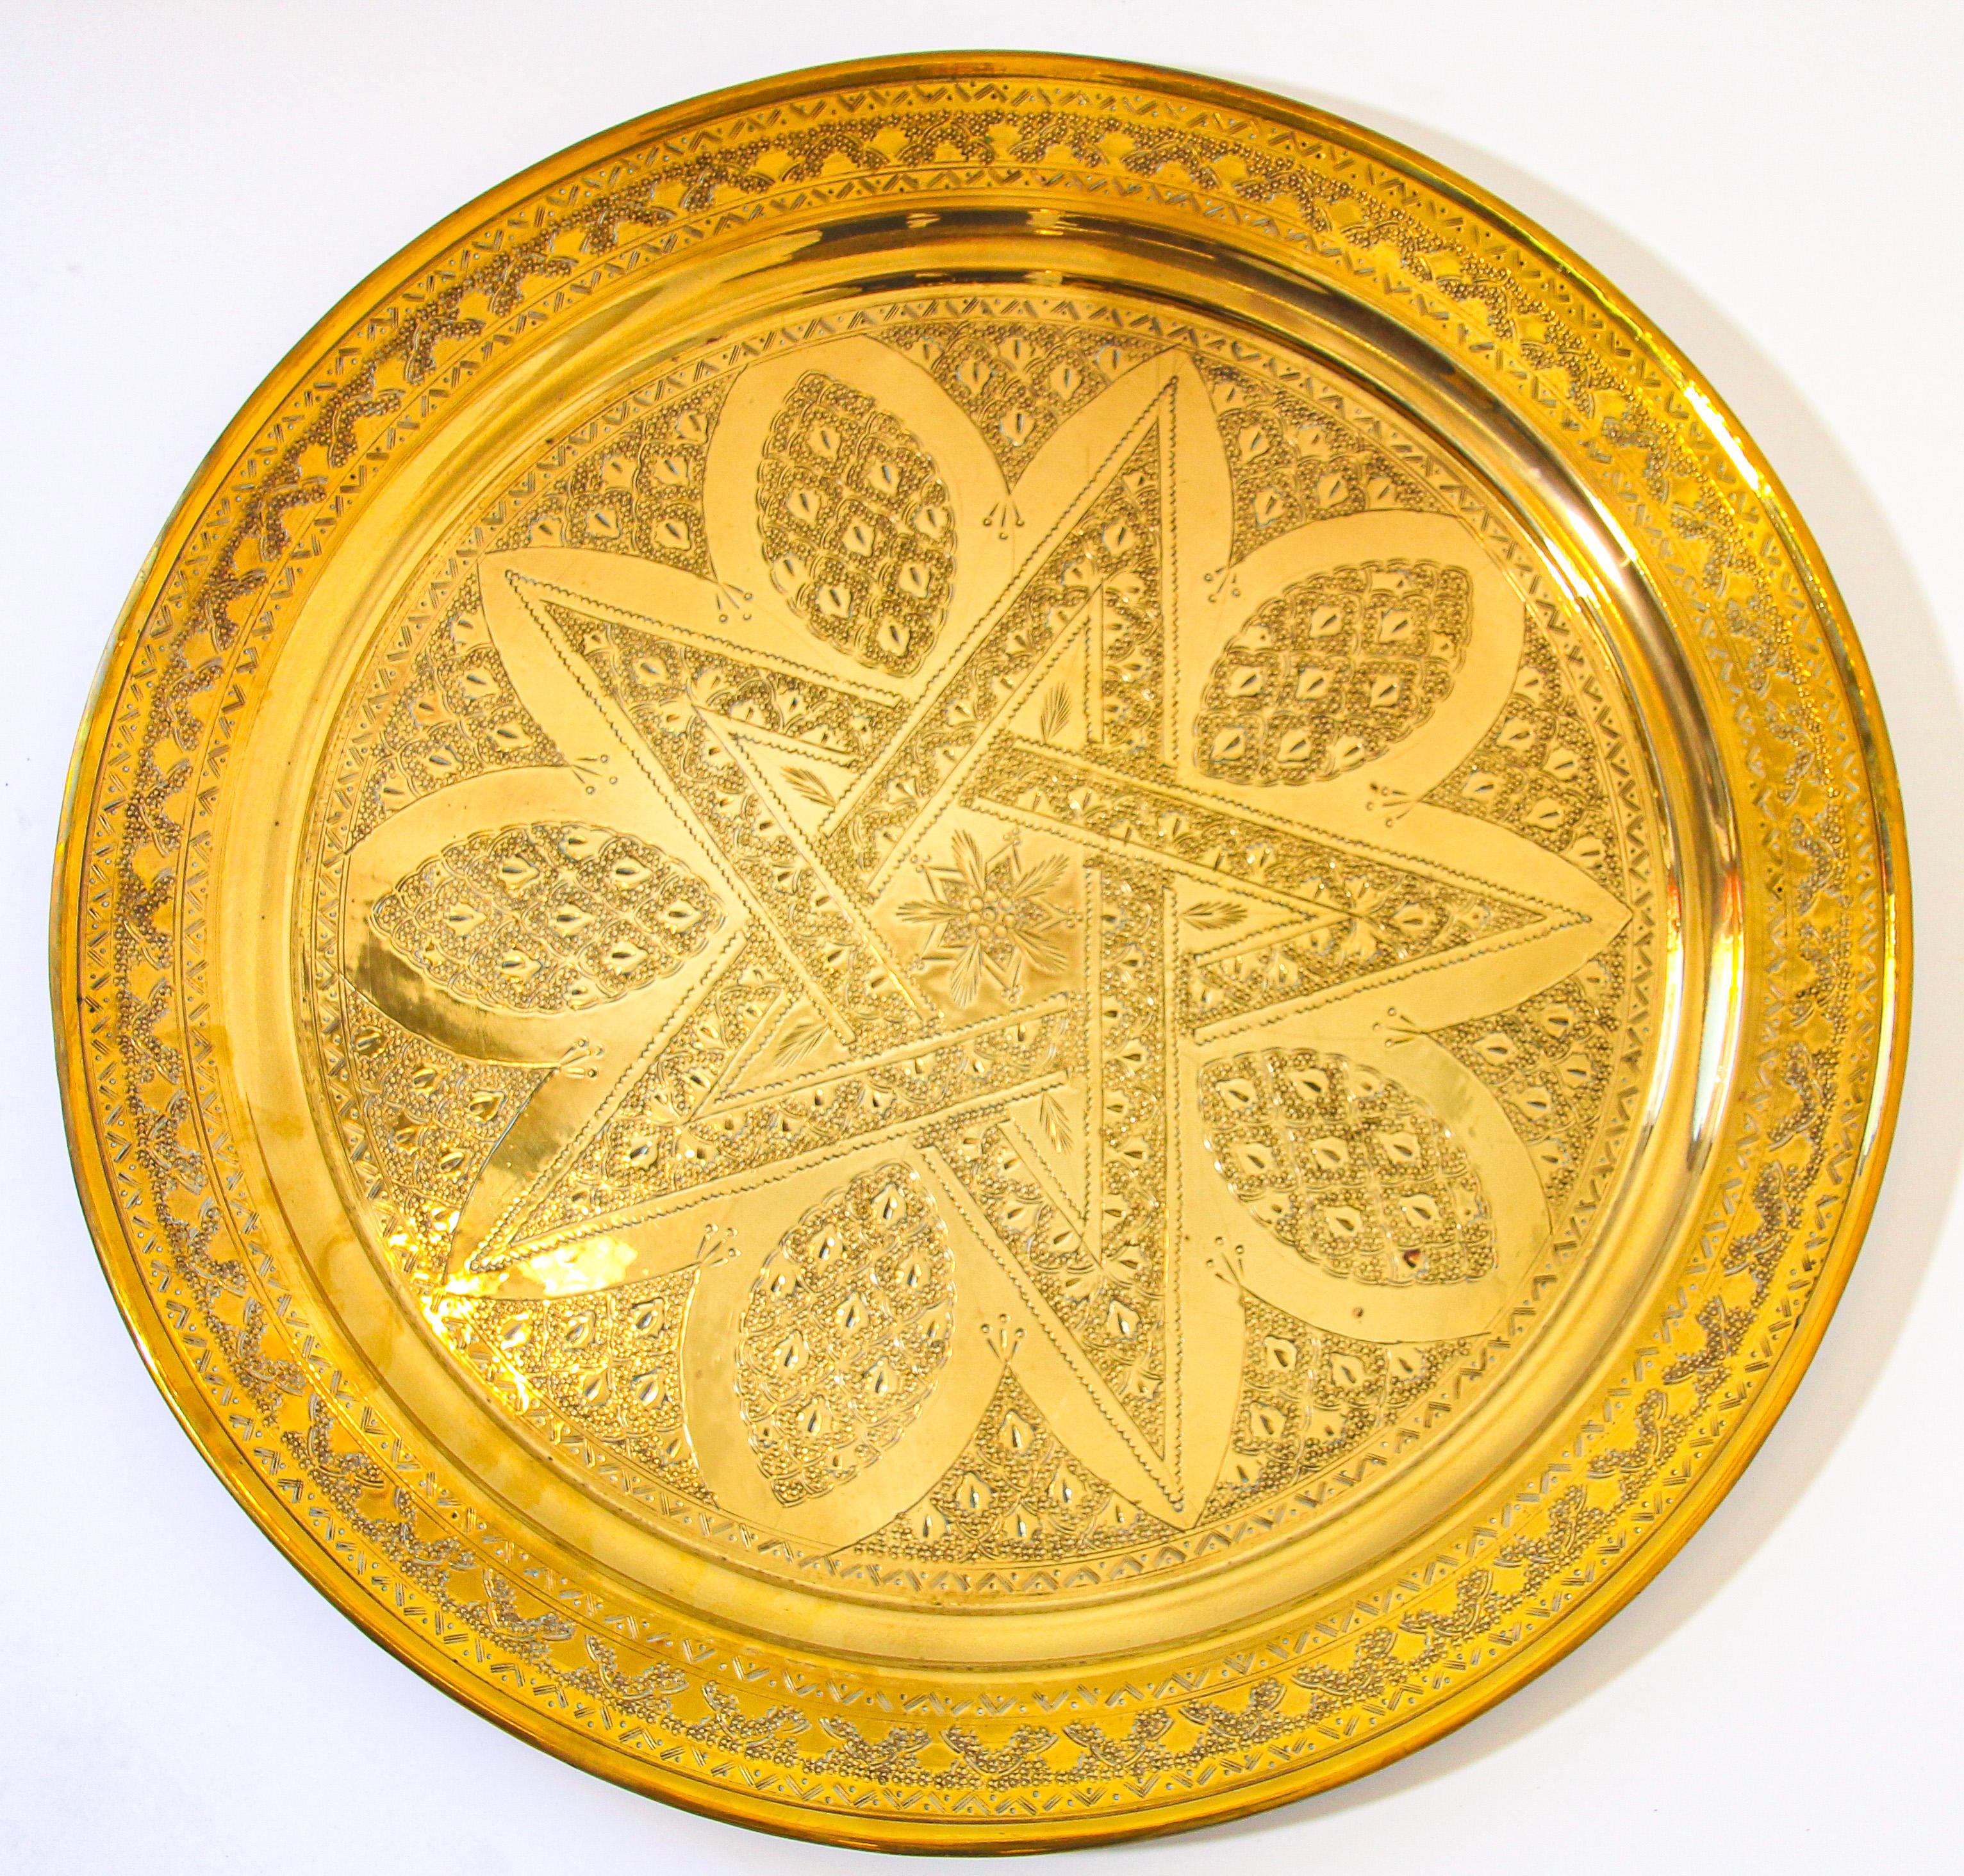 Antique 1900s Moroccan hand-hammered brass tray, intricate artwork, very fine Islamic metalwork brass hand etched designs with a five pointed star in the center.
Handcrafted decorative polished brass tray.
Fabulous hand-etched wall hanging